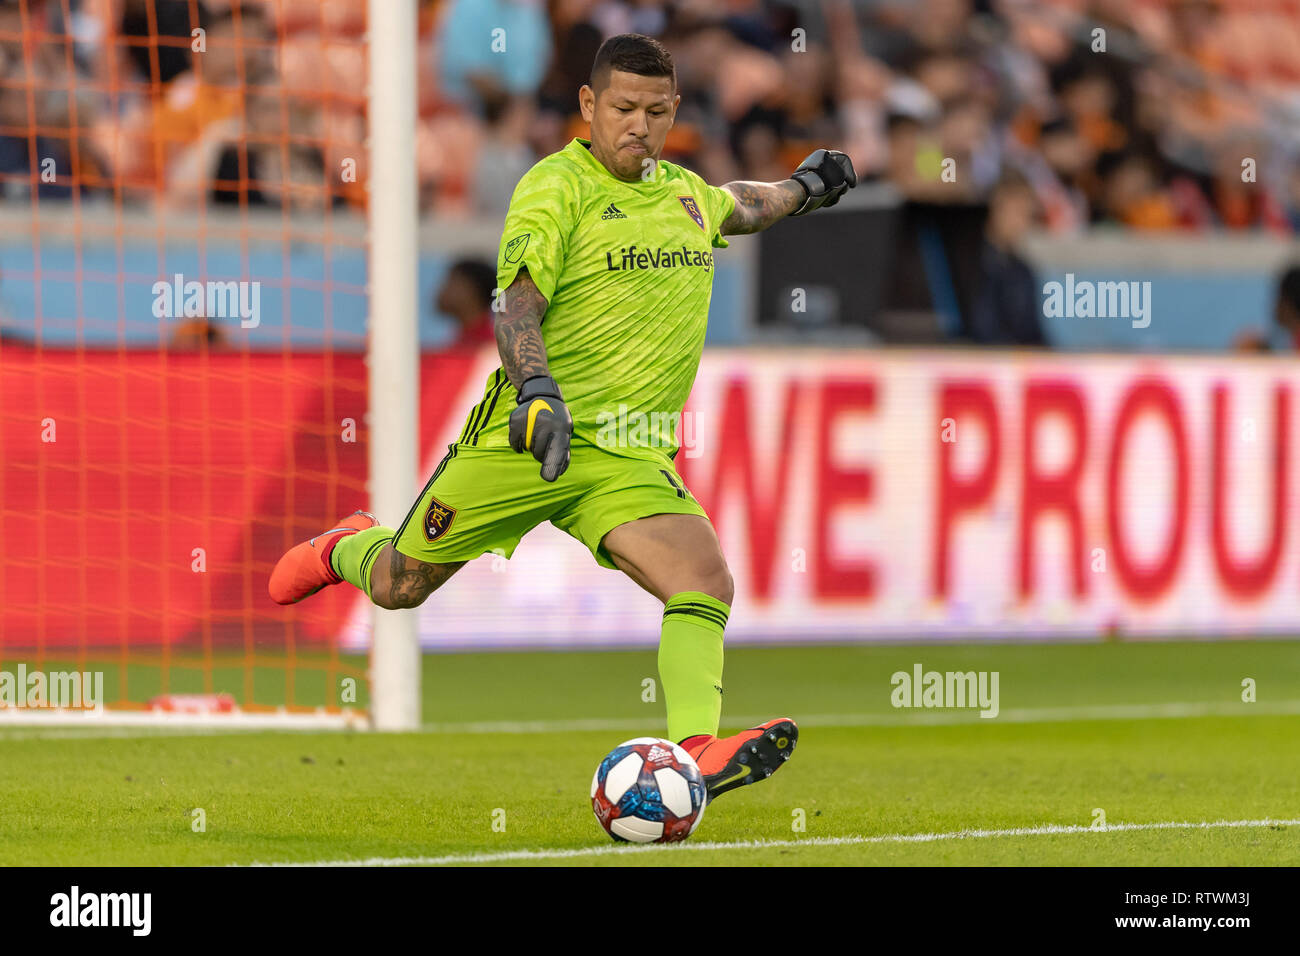 March 02, 2019: Real Salt Lake goalkeeper Nick Rimando (18) sends the ball down pitch during a match between Real Salt Lake and Houston Dynamo at BBVA Compass Stadium in Houston, Texas Houston Dynamo tie with Real Salt Lake1-1 © Maria Lysaker/Cal Sport Media Stock Photo